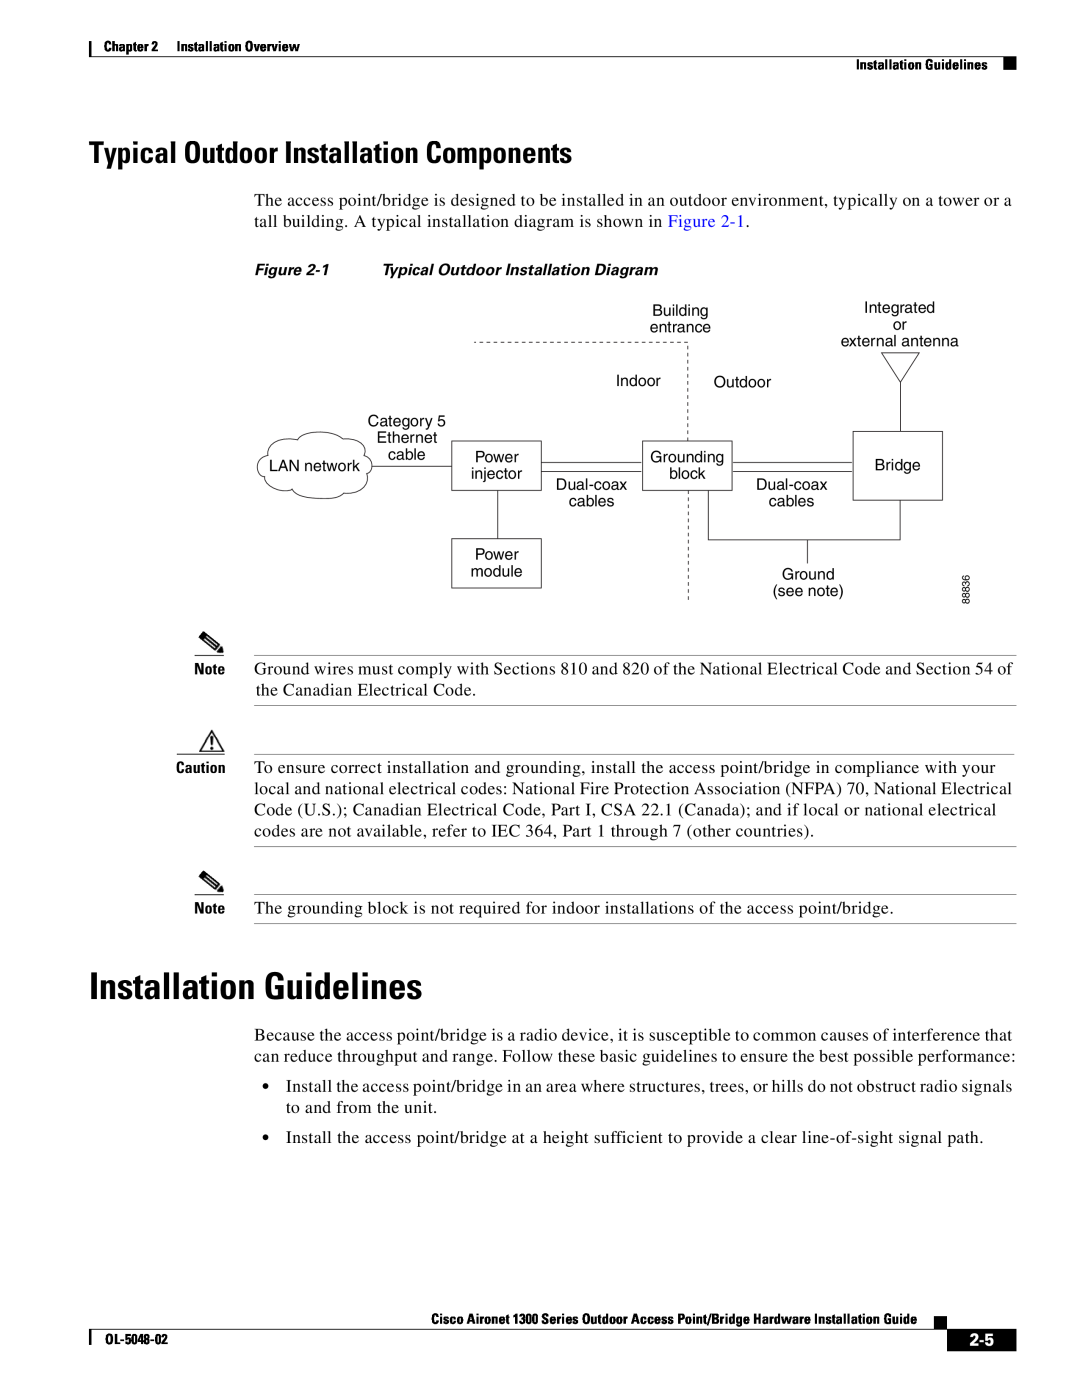 Cisco Systems 1300 Series manual Installation Guidelines, Typical Outdoor Installation Components 